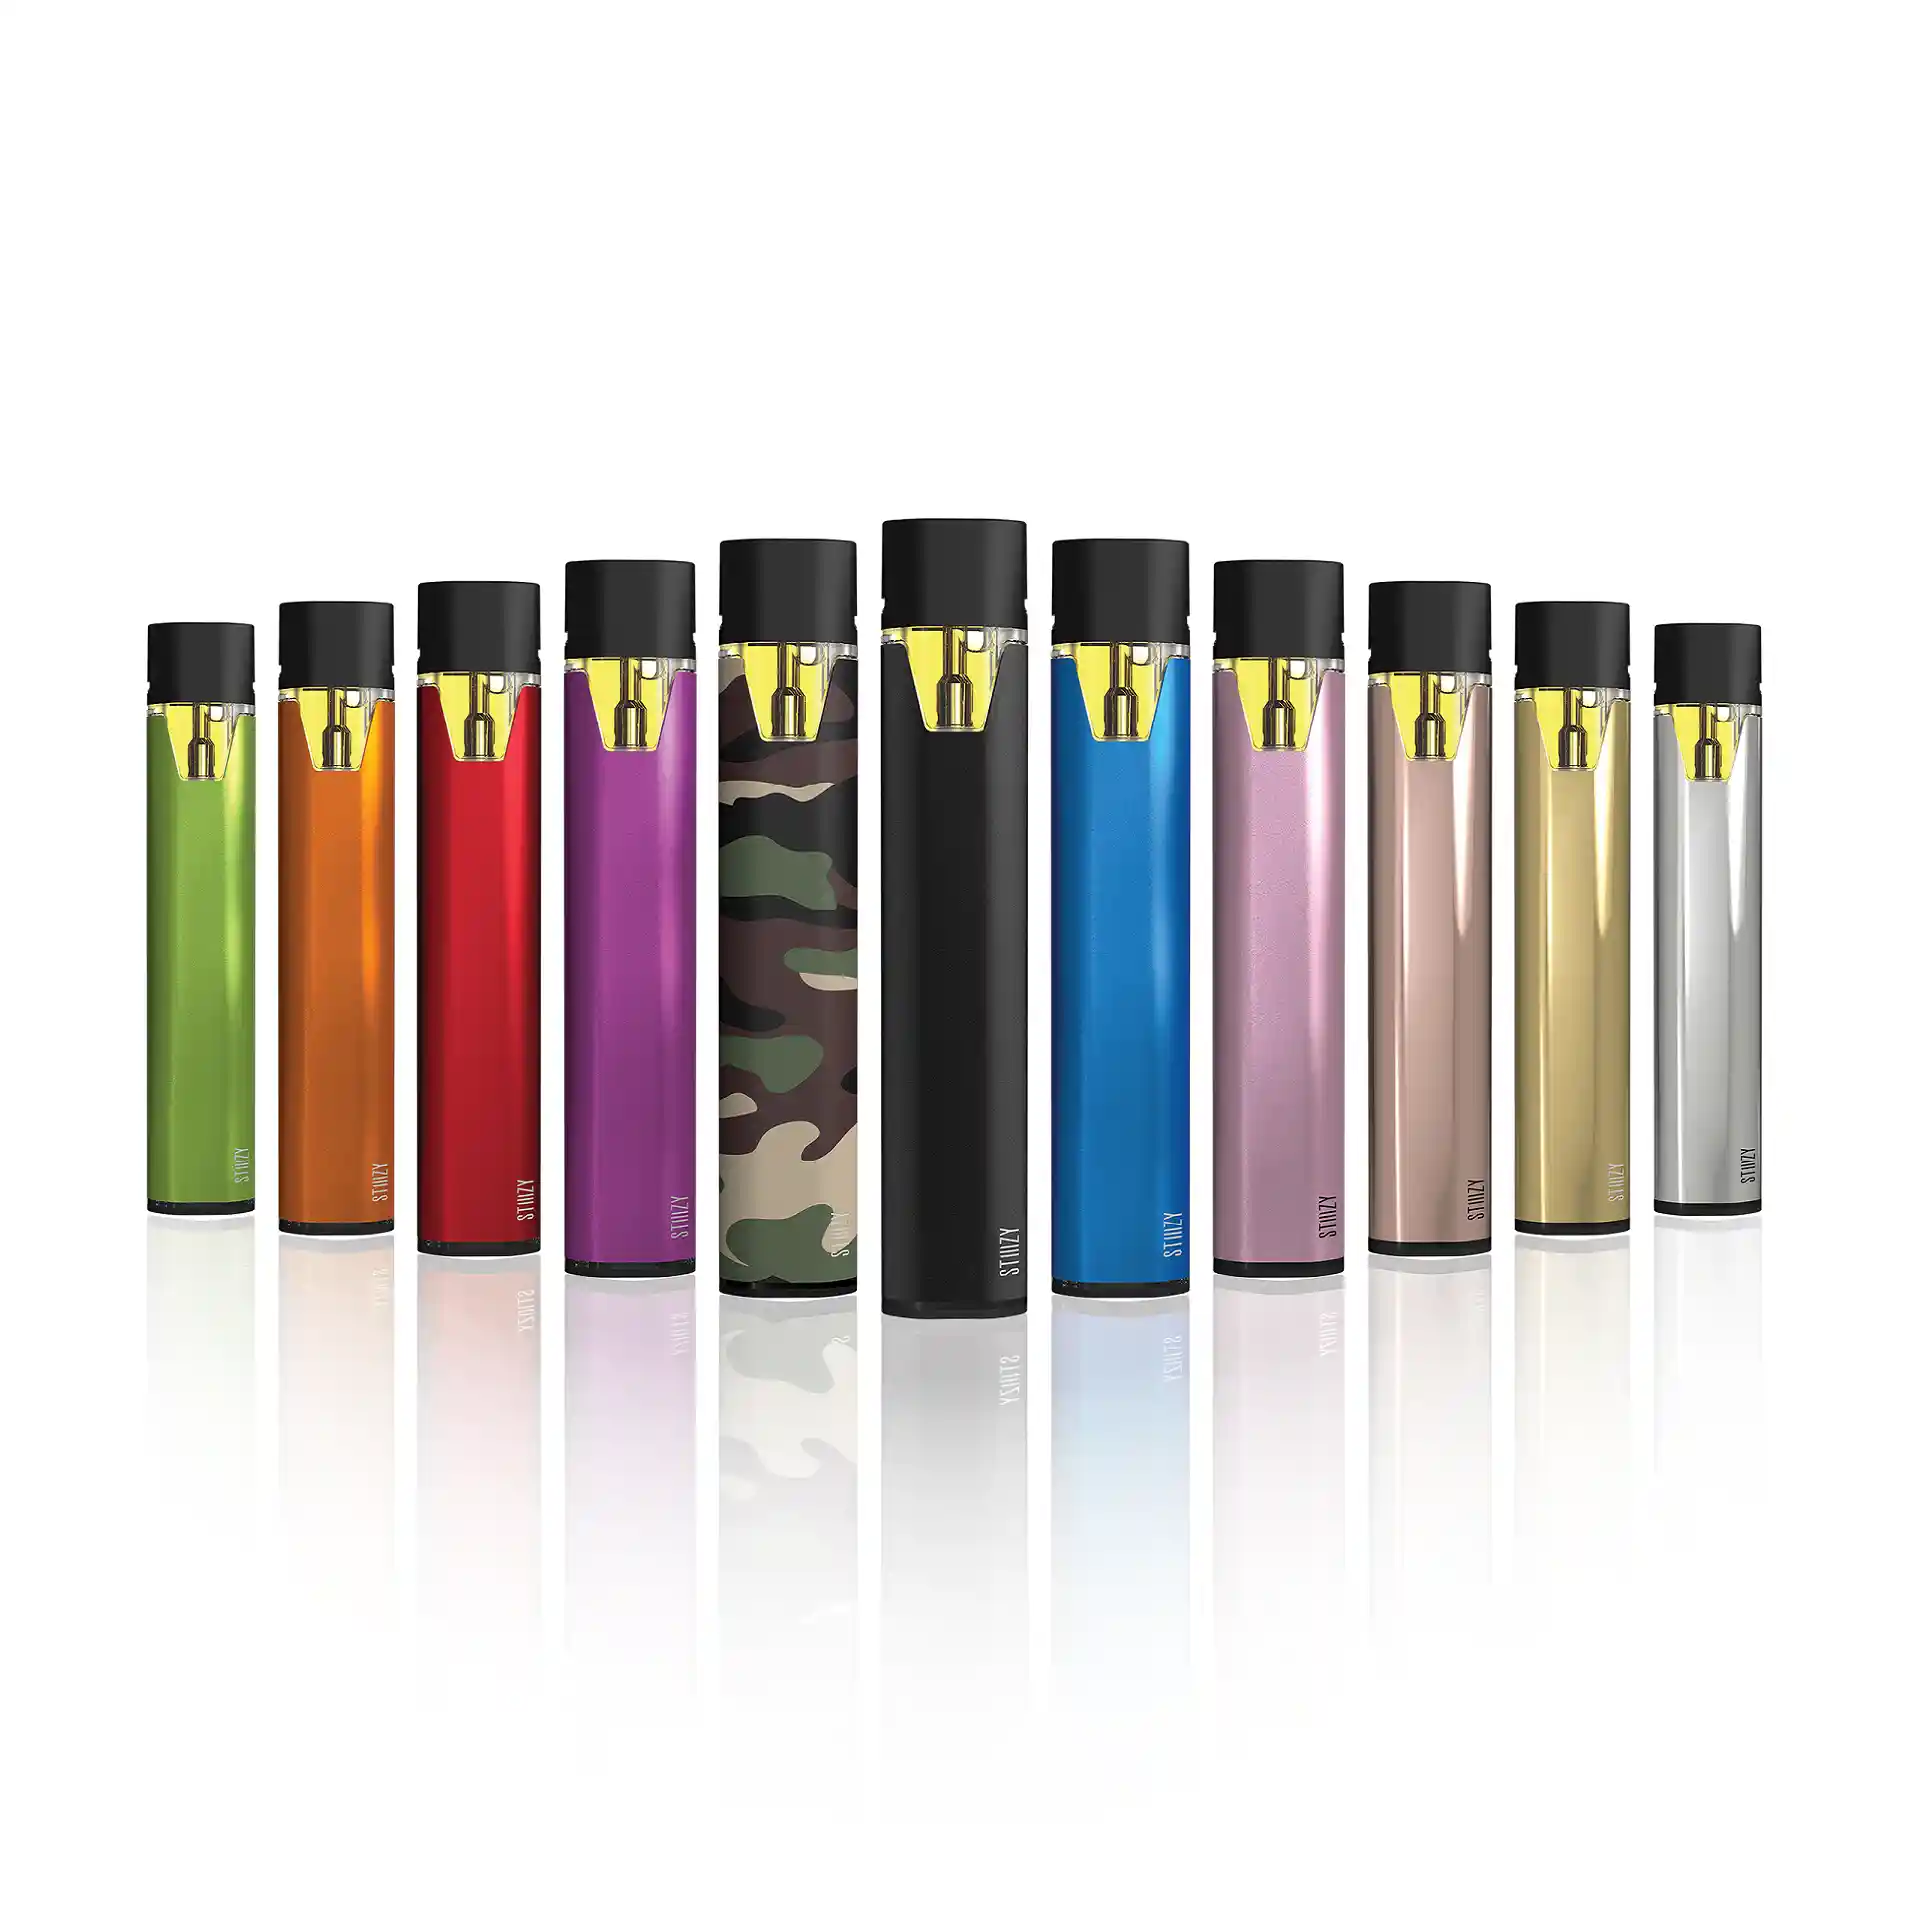 Row of different stiiizy colored vapes sitting next to each other